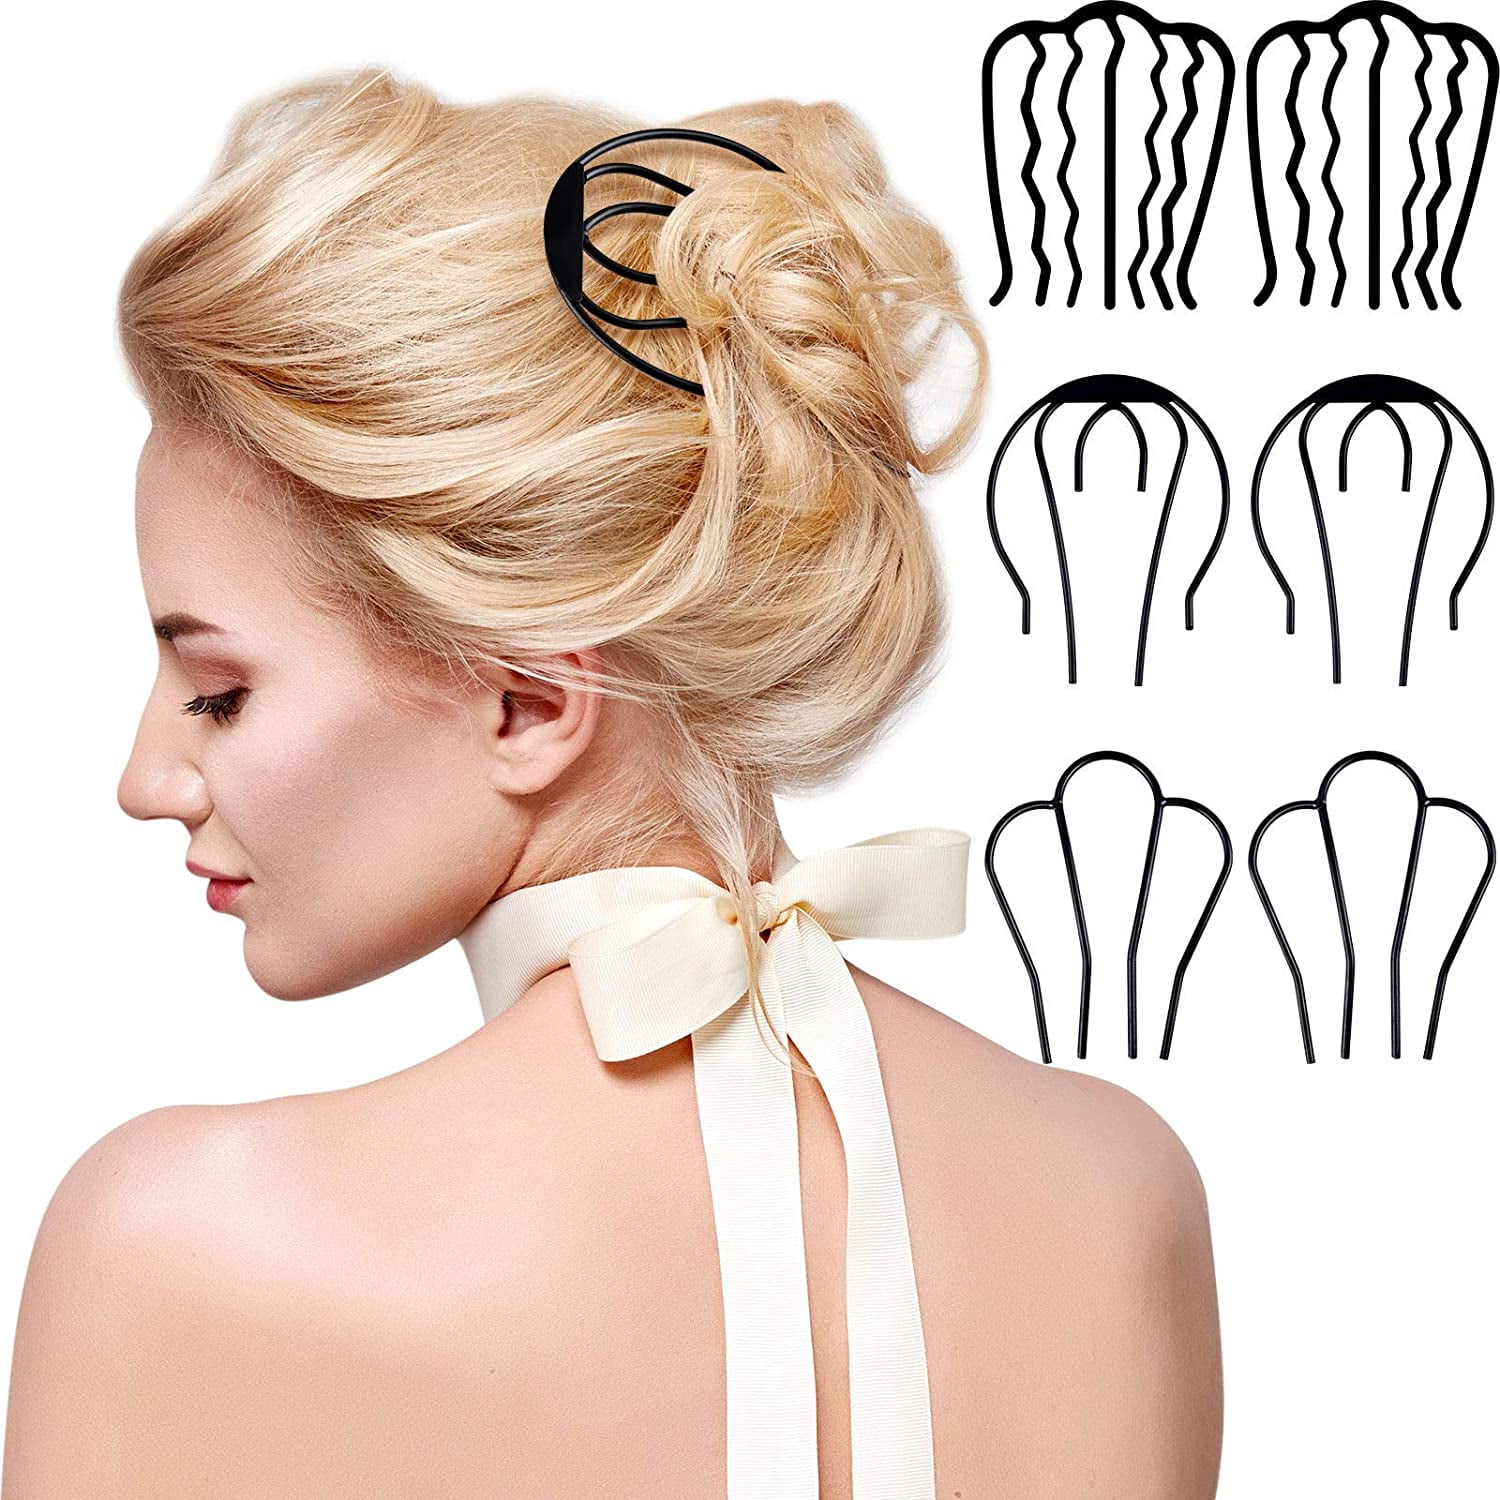 Buy Hair Flare Womens White Hair Accessories 2154 Artificial Flowers  Bridal Hair Pins Clips Accessories for Women Pack of 1 Online at Low  Prices in India  Amazonin